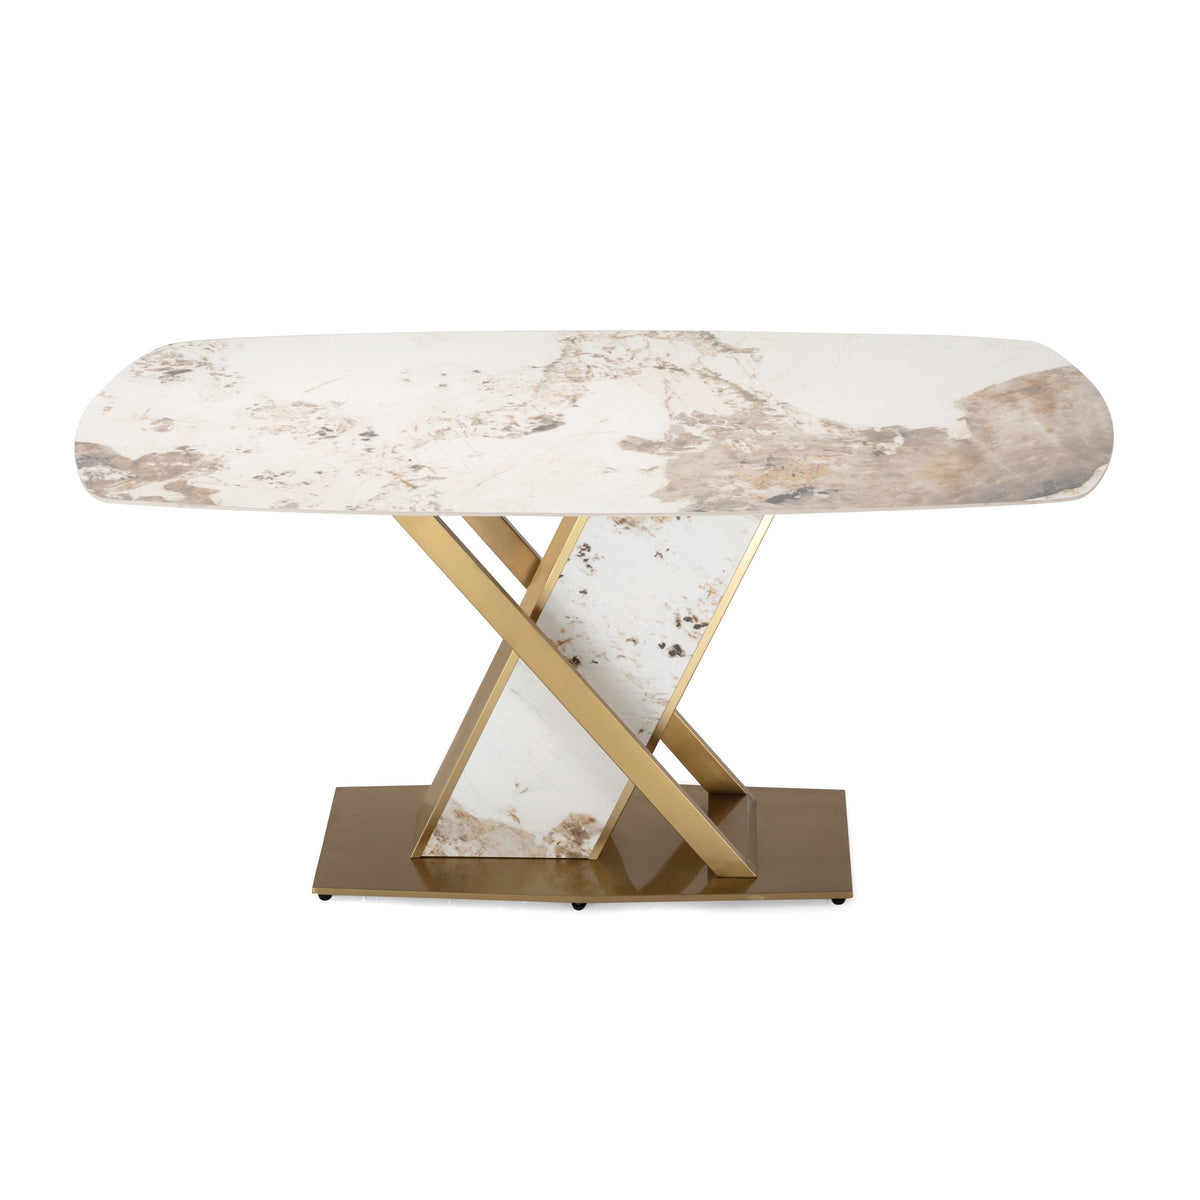 Modern Brilliant Sintered Stone Dining Table 63x35.4x29.5inch